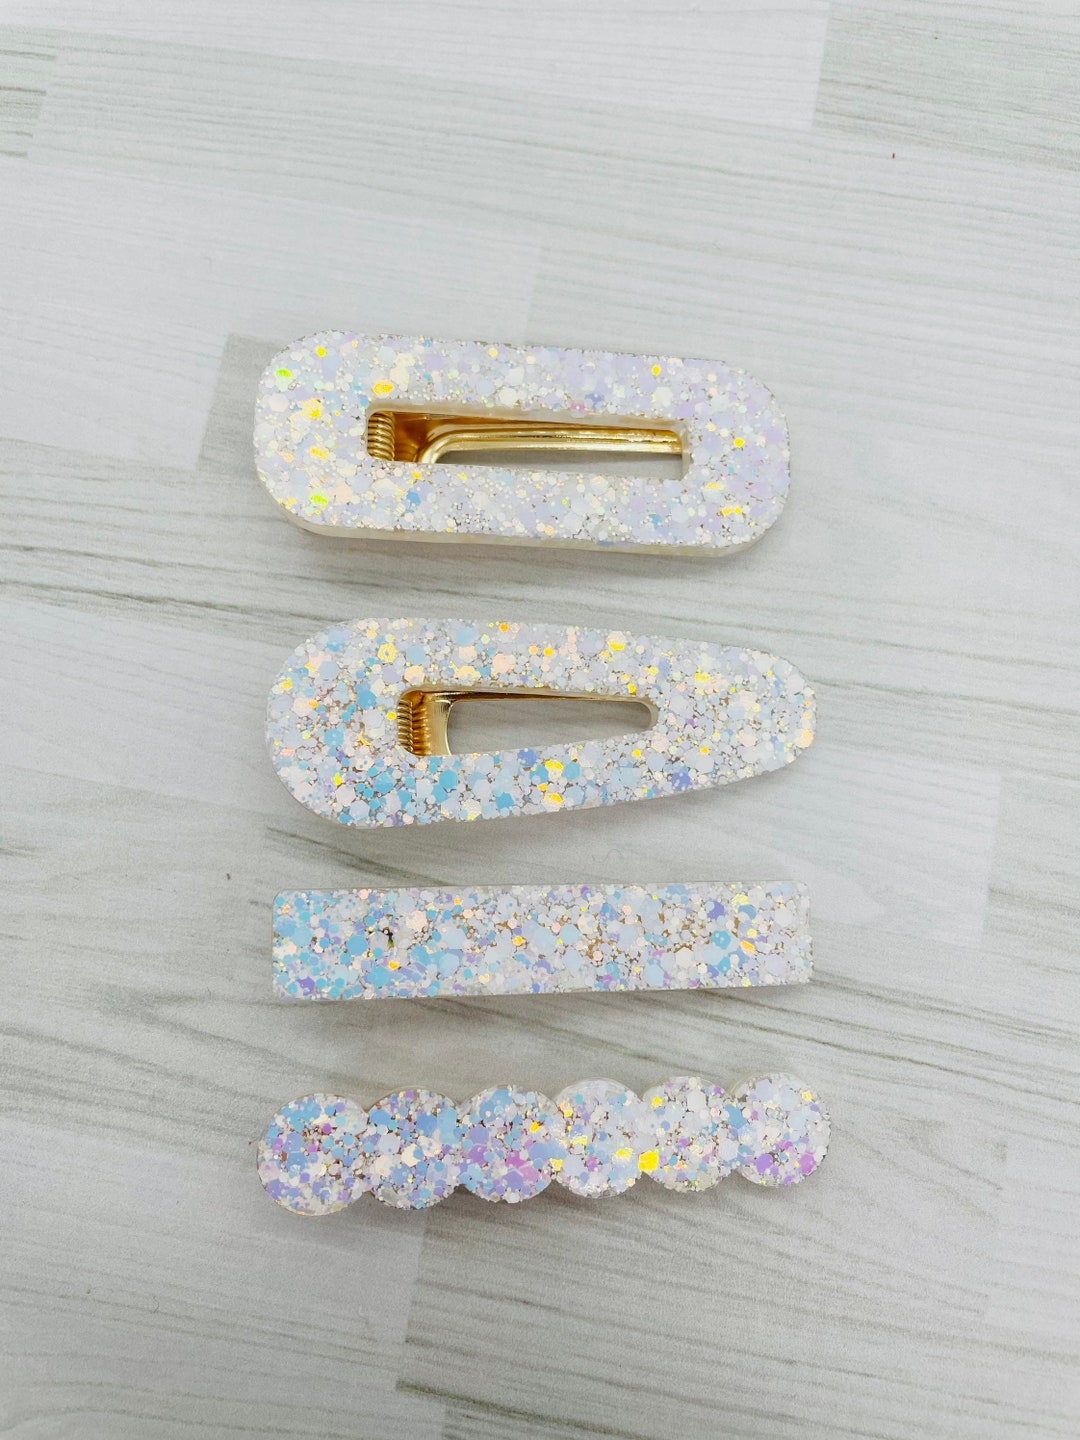 Frosted Snow Holograhic Glitter Resin Clips Acrylic Hair - Etsy